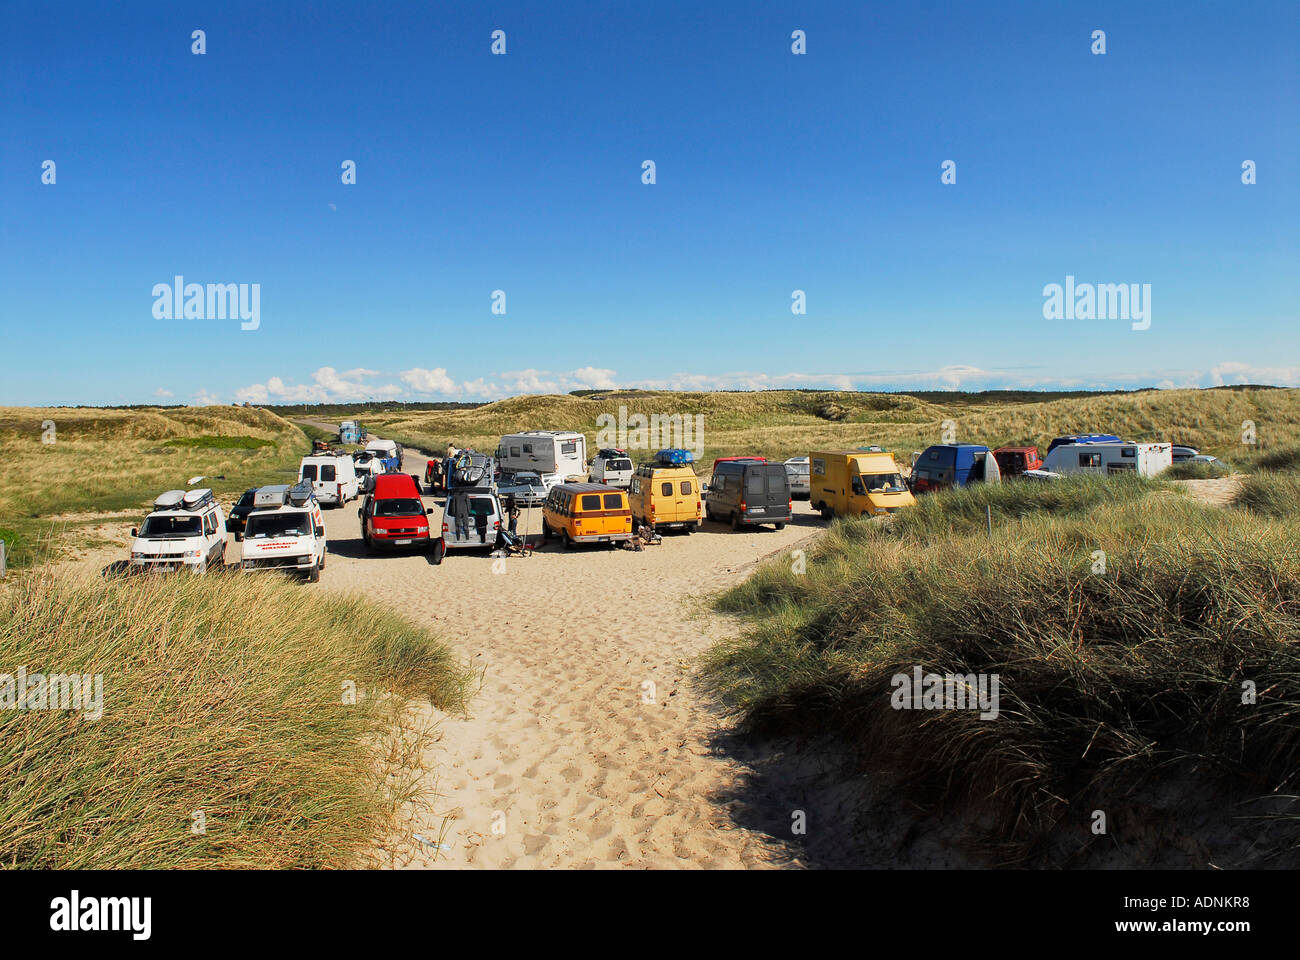 Parking place for campmobiles close to the beach Stock Photo